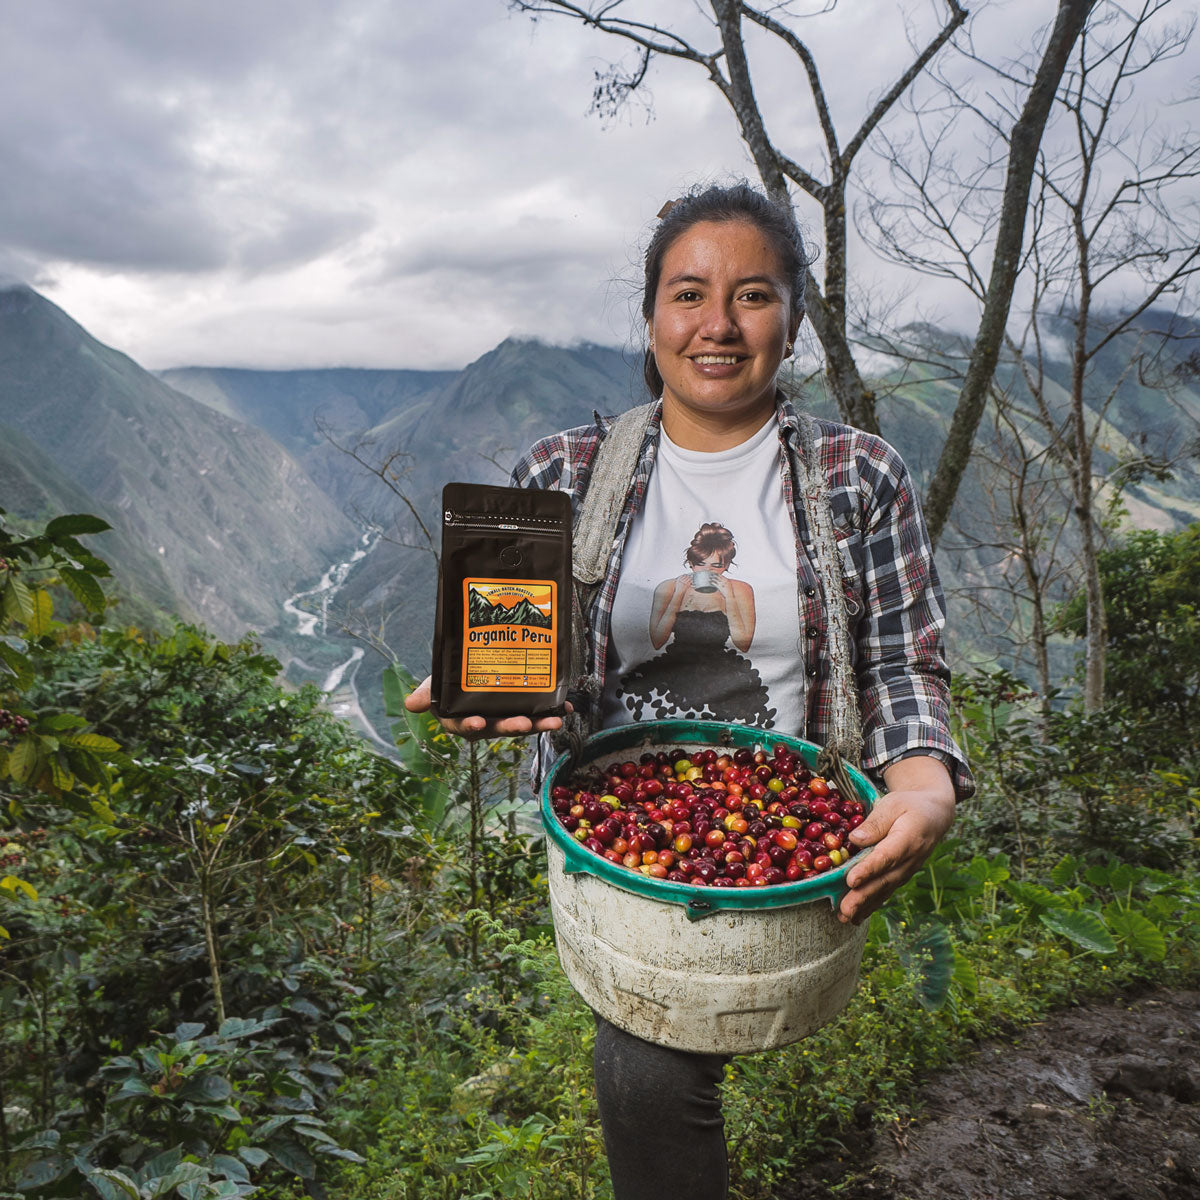 Peruvian coffee farmer holding unprocessed coffee cherries and a 12oz bag of Organic Peru coffee in front of the mountains